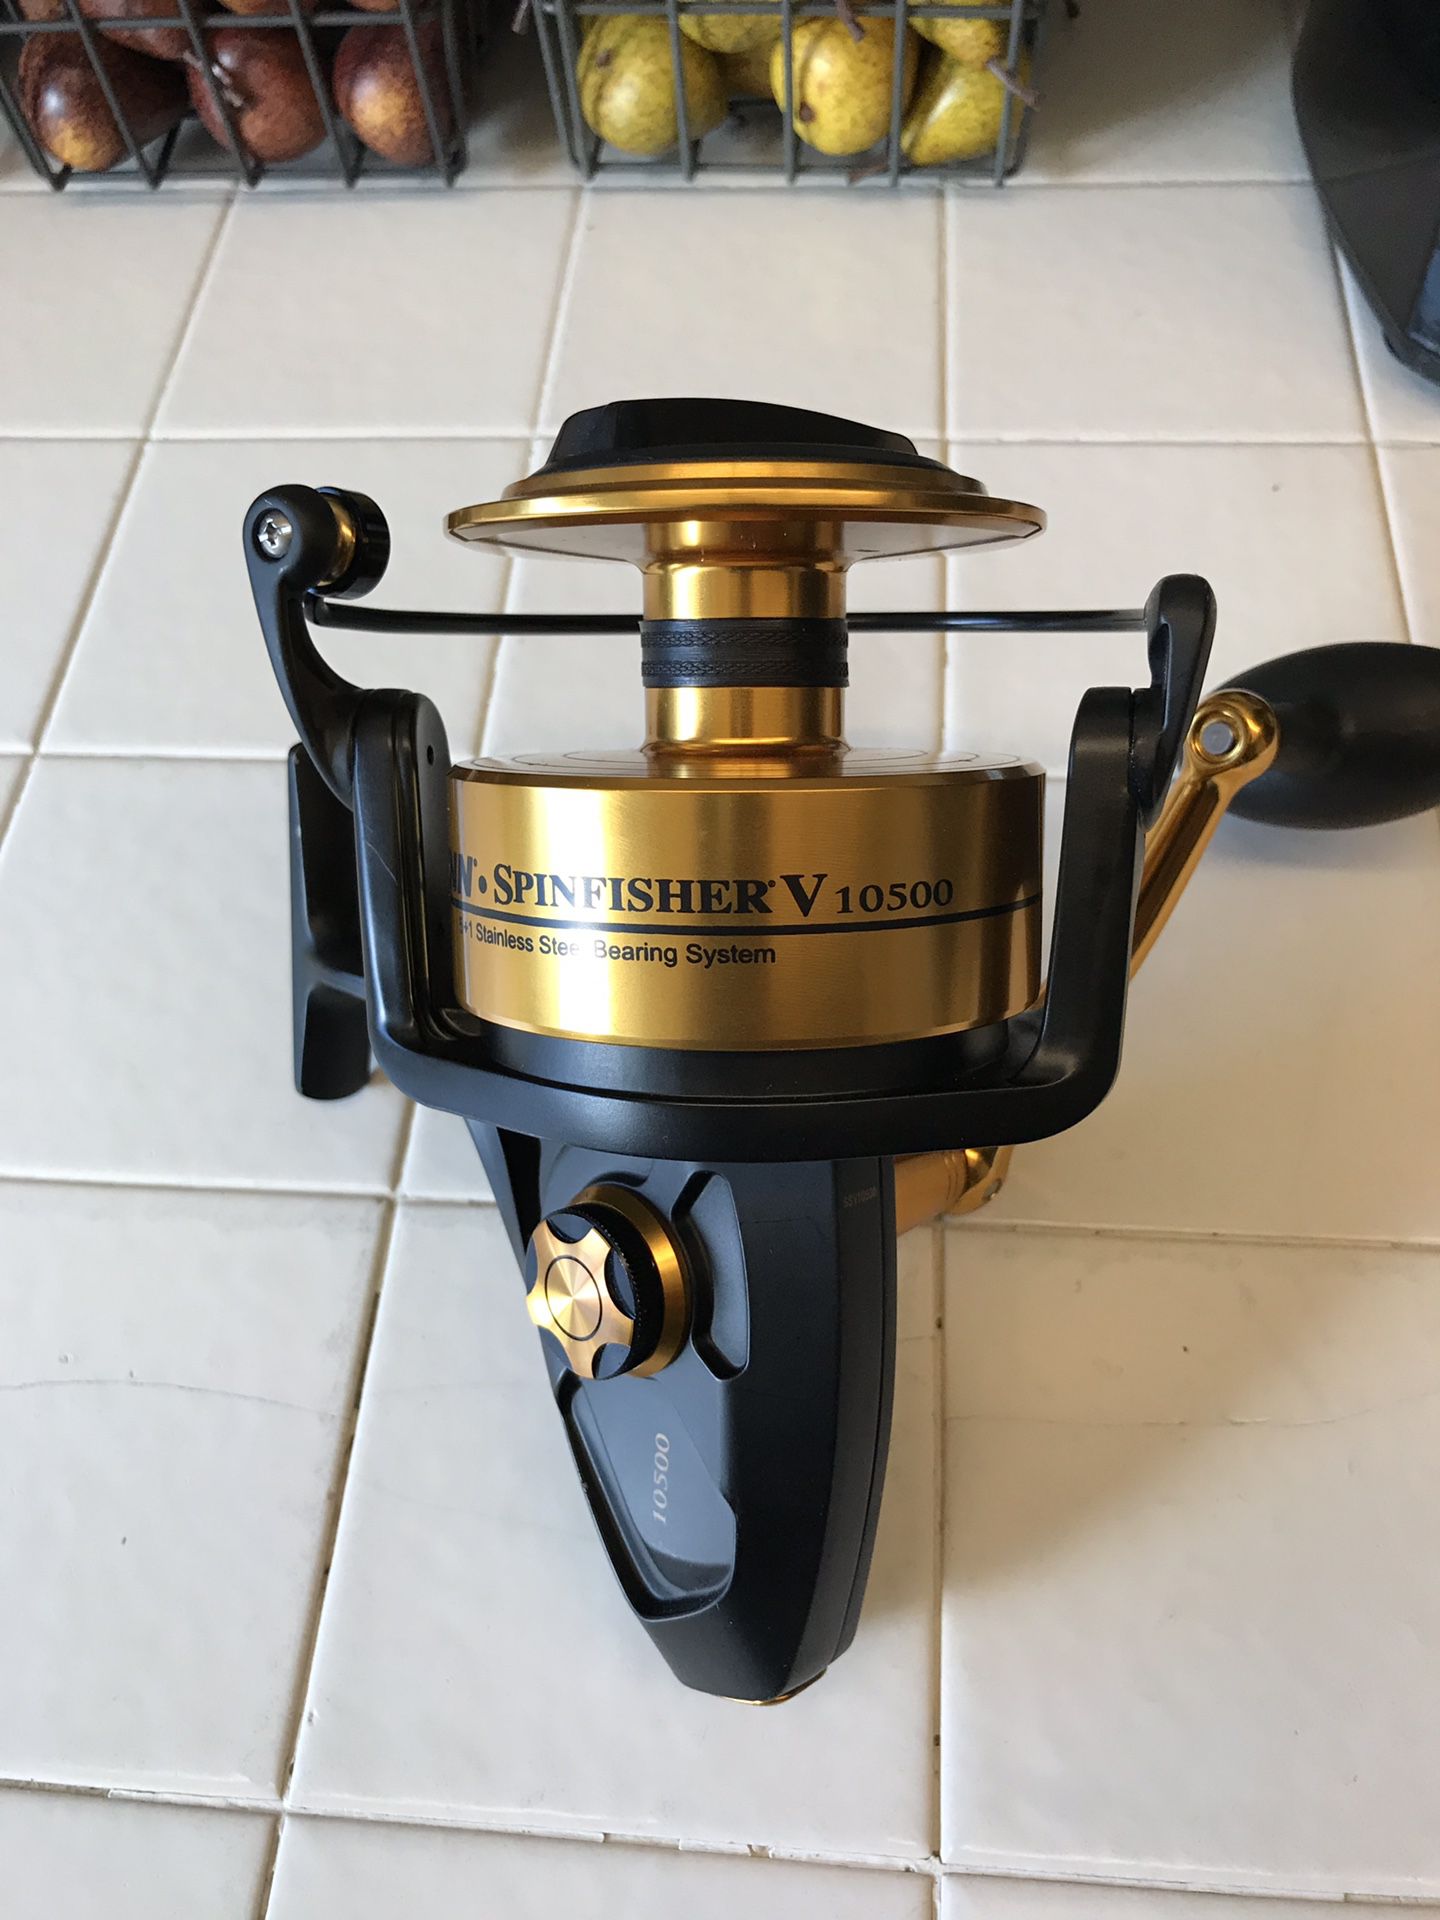 PENN SPINFISHER V 10500 for Sale in Tustin, CA - OfferUp